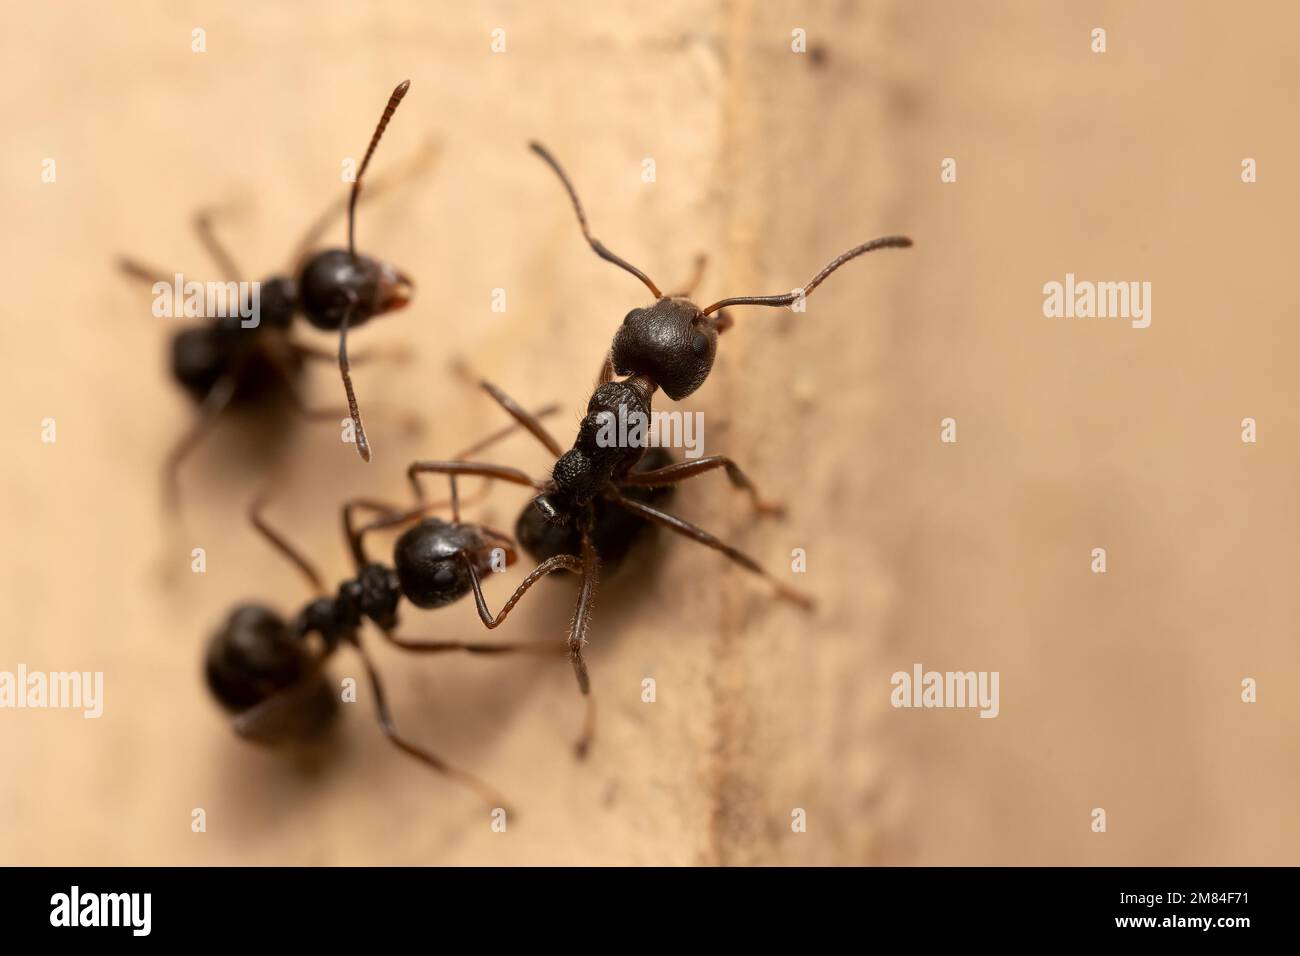 Macro photography of black ants on the wall. Stock Photo